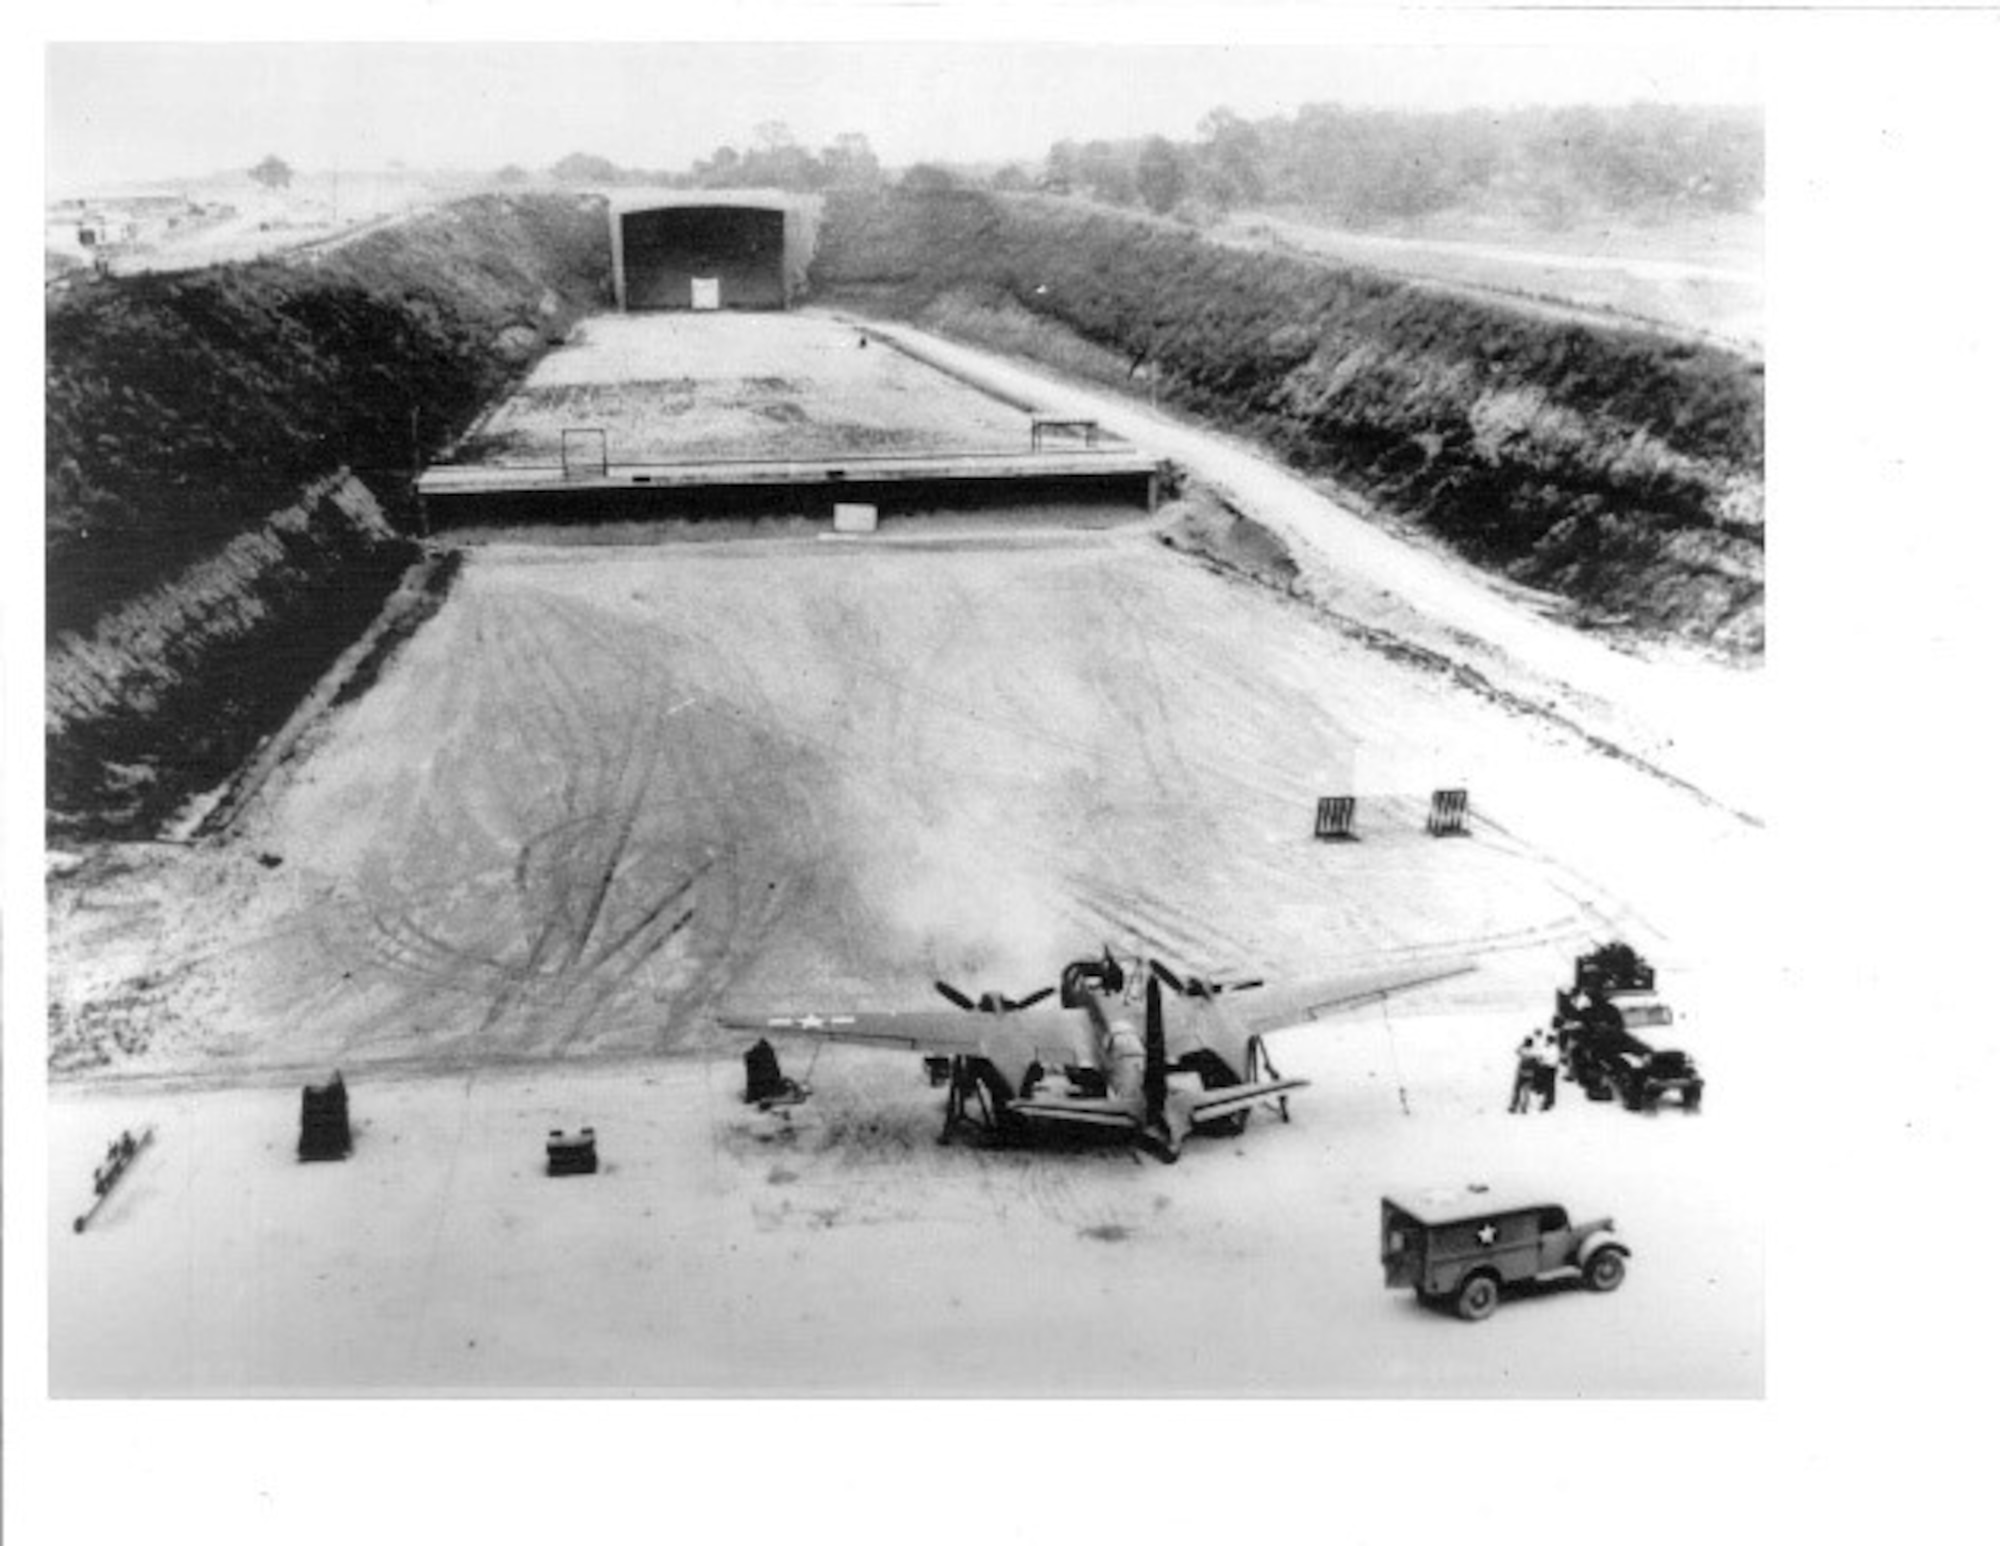 This historic photo shows one of the ranges at what is now known as the Aerospace Vehicle Survivability Facility (AVSF). The AVSF is responsible for developing and executing aircraft Title 10 Live Fire Test and Evaluation programs as well as research, development, test and evaluation in addition to high-fidelity modeling and simulation of aerospace vehicle combat survivability to evaluate and enhance system performance to current and future weapon systems under operationally-realistic conditions. The AVSF is operated by the Aerospace Survivability and Safety Office at Wright-Patterson Air Force Base, Ohio. This office is part of the 704th Test Group at Holloman Air Force Base, New Mexico. The 704 TG is a unit of the Arnold Engineering Development Complex headquartered at Arnold Air Force Base, Tennessee. (Courtesy photo)